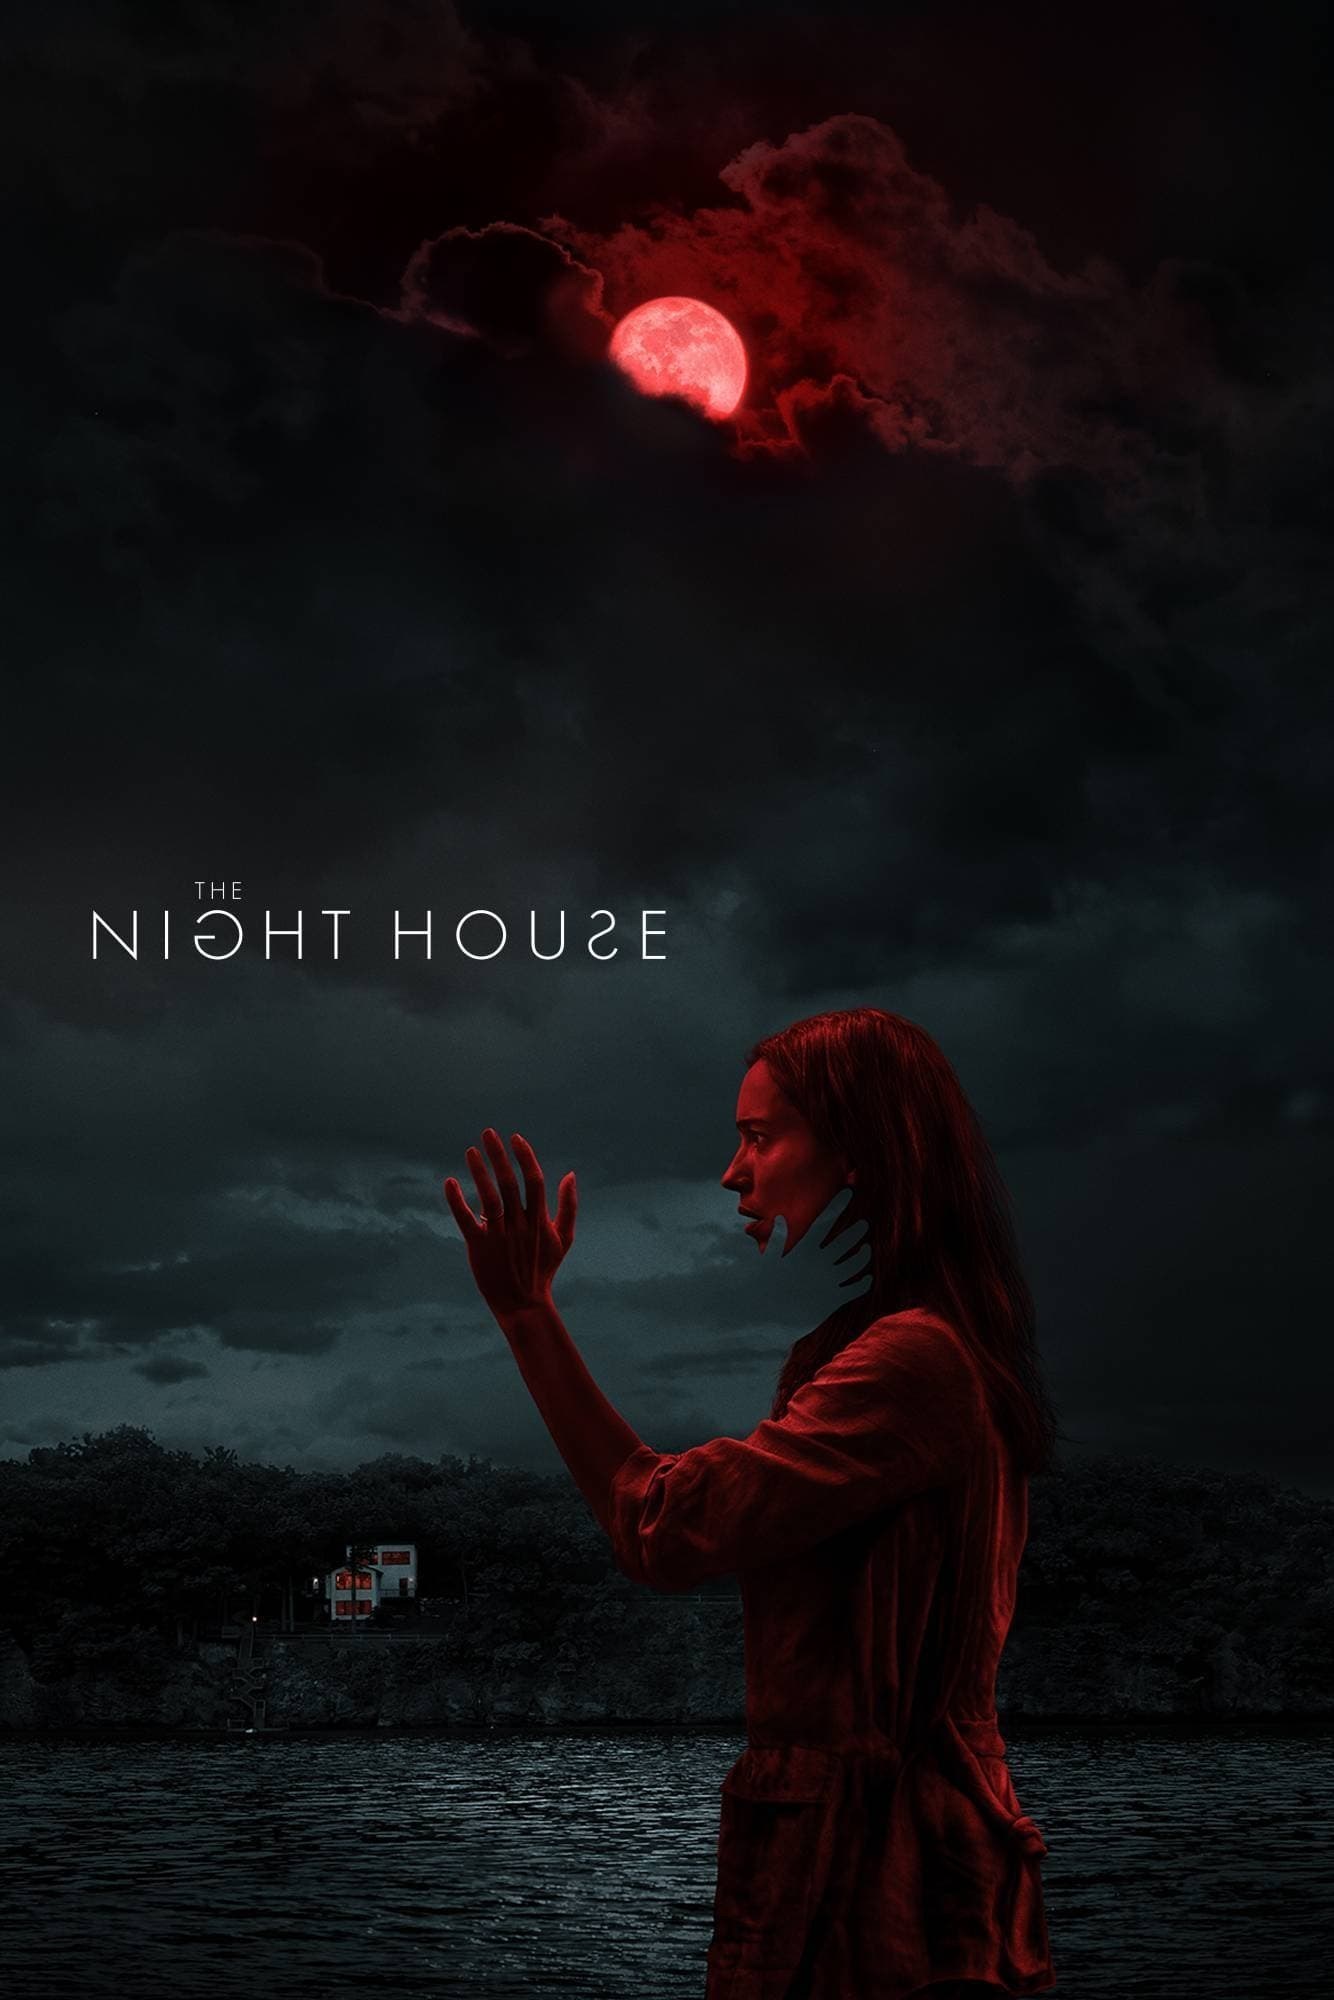 The night house 2020 4k quality